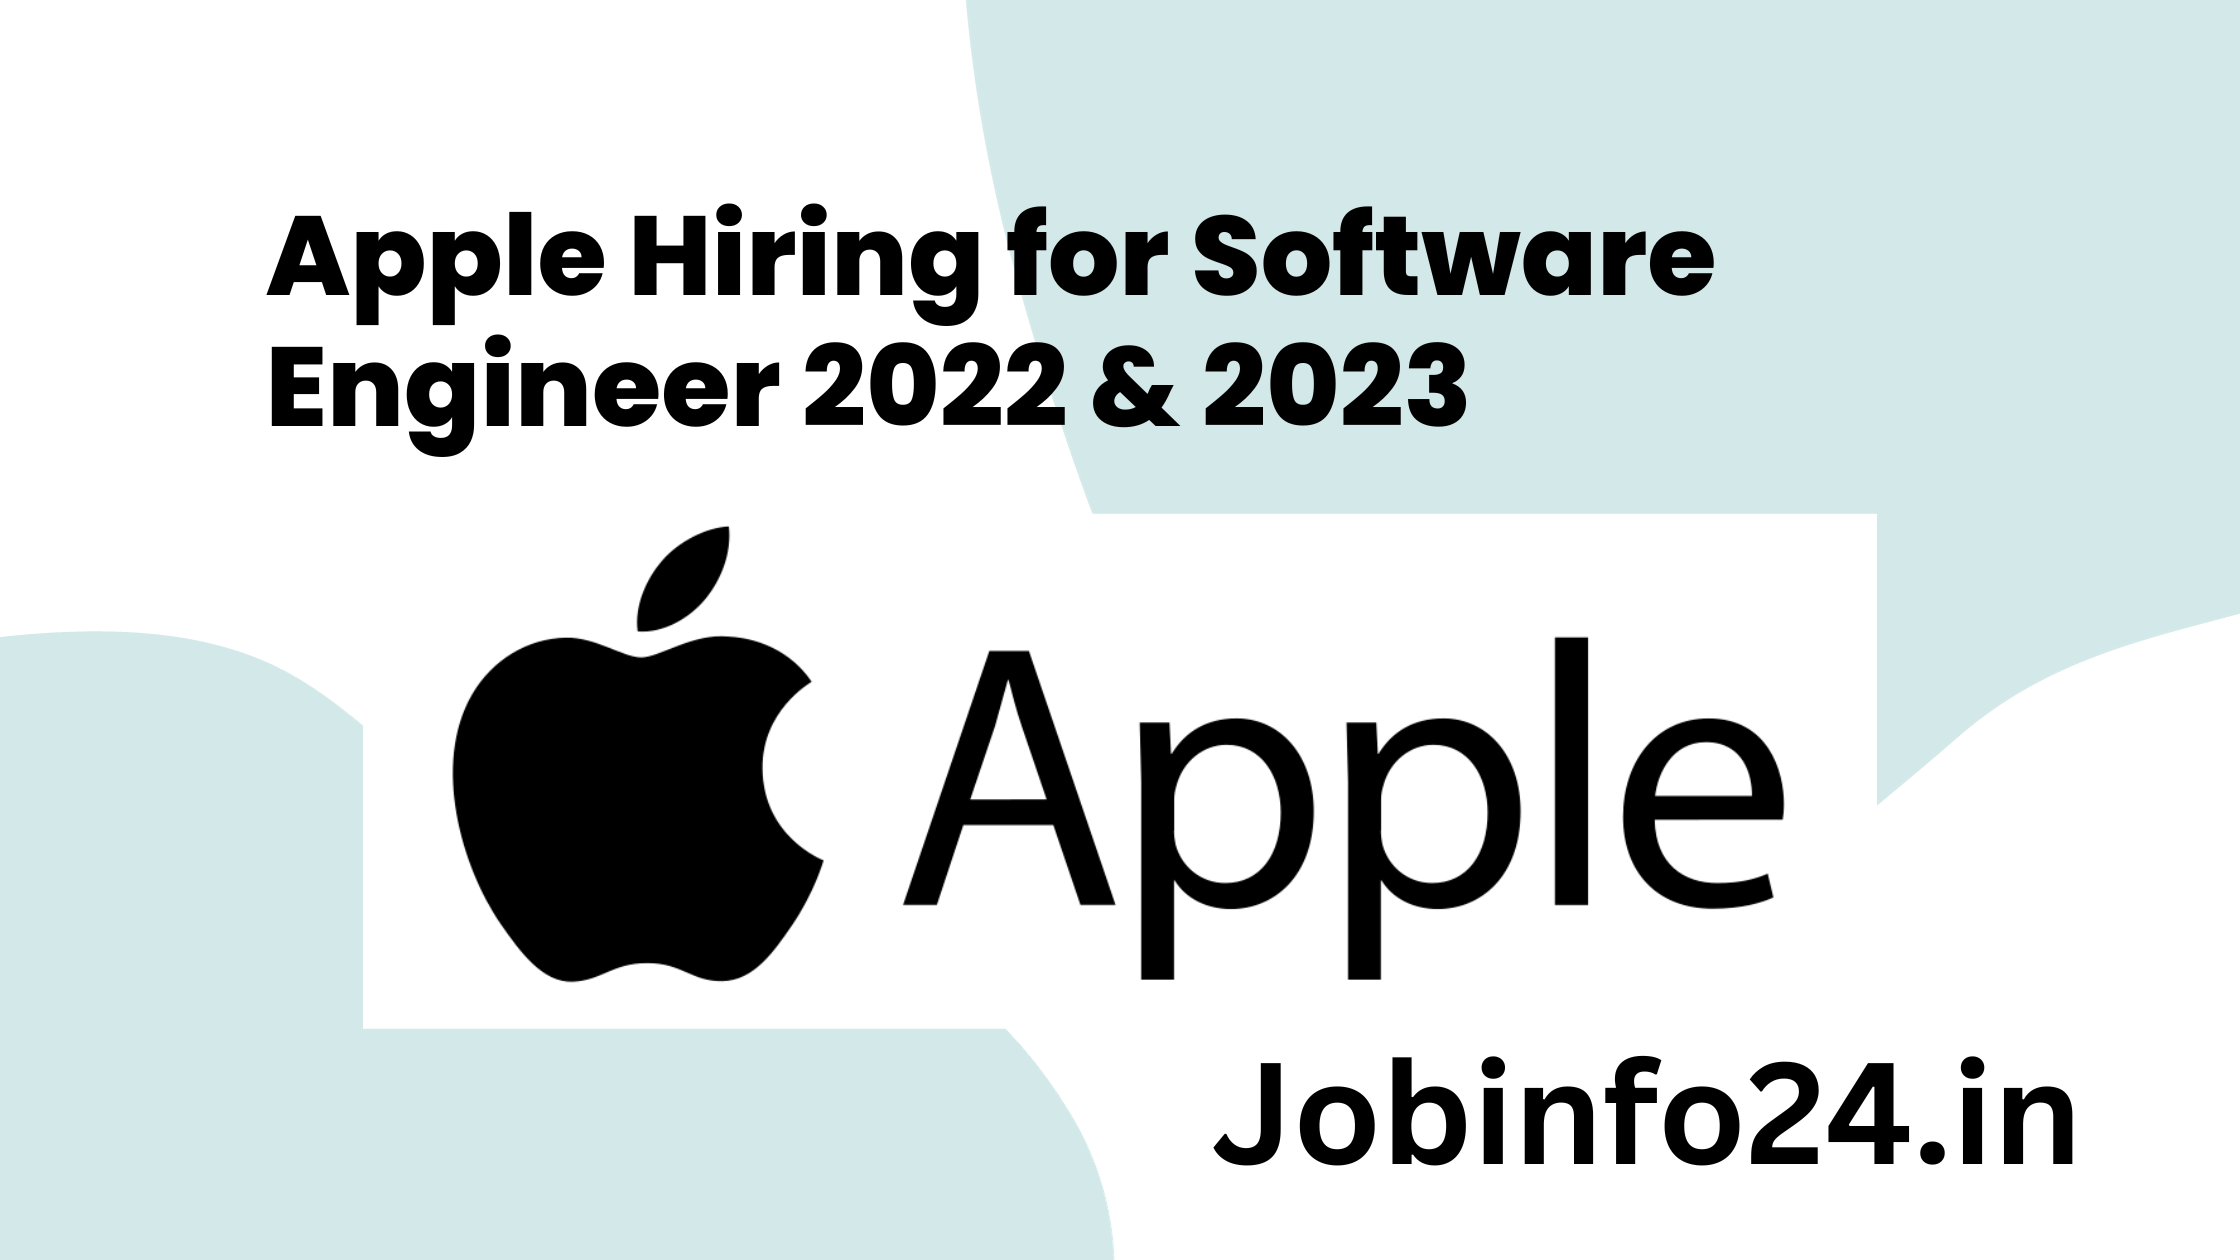 Apple Hiring for Software Engineer 2022 & 2023